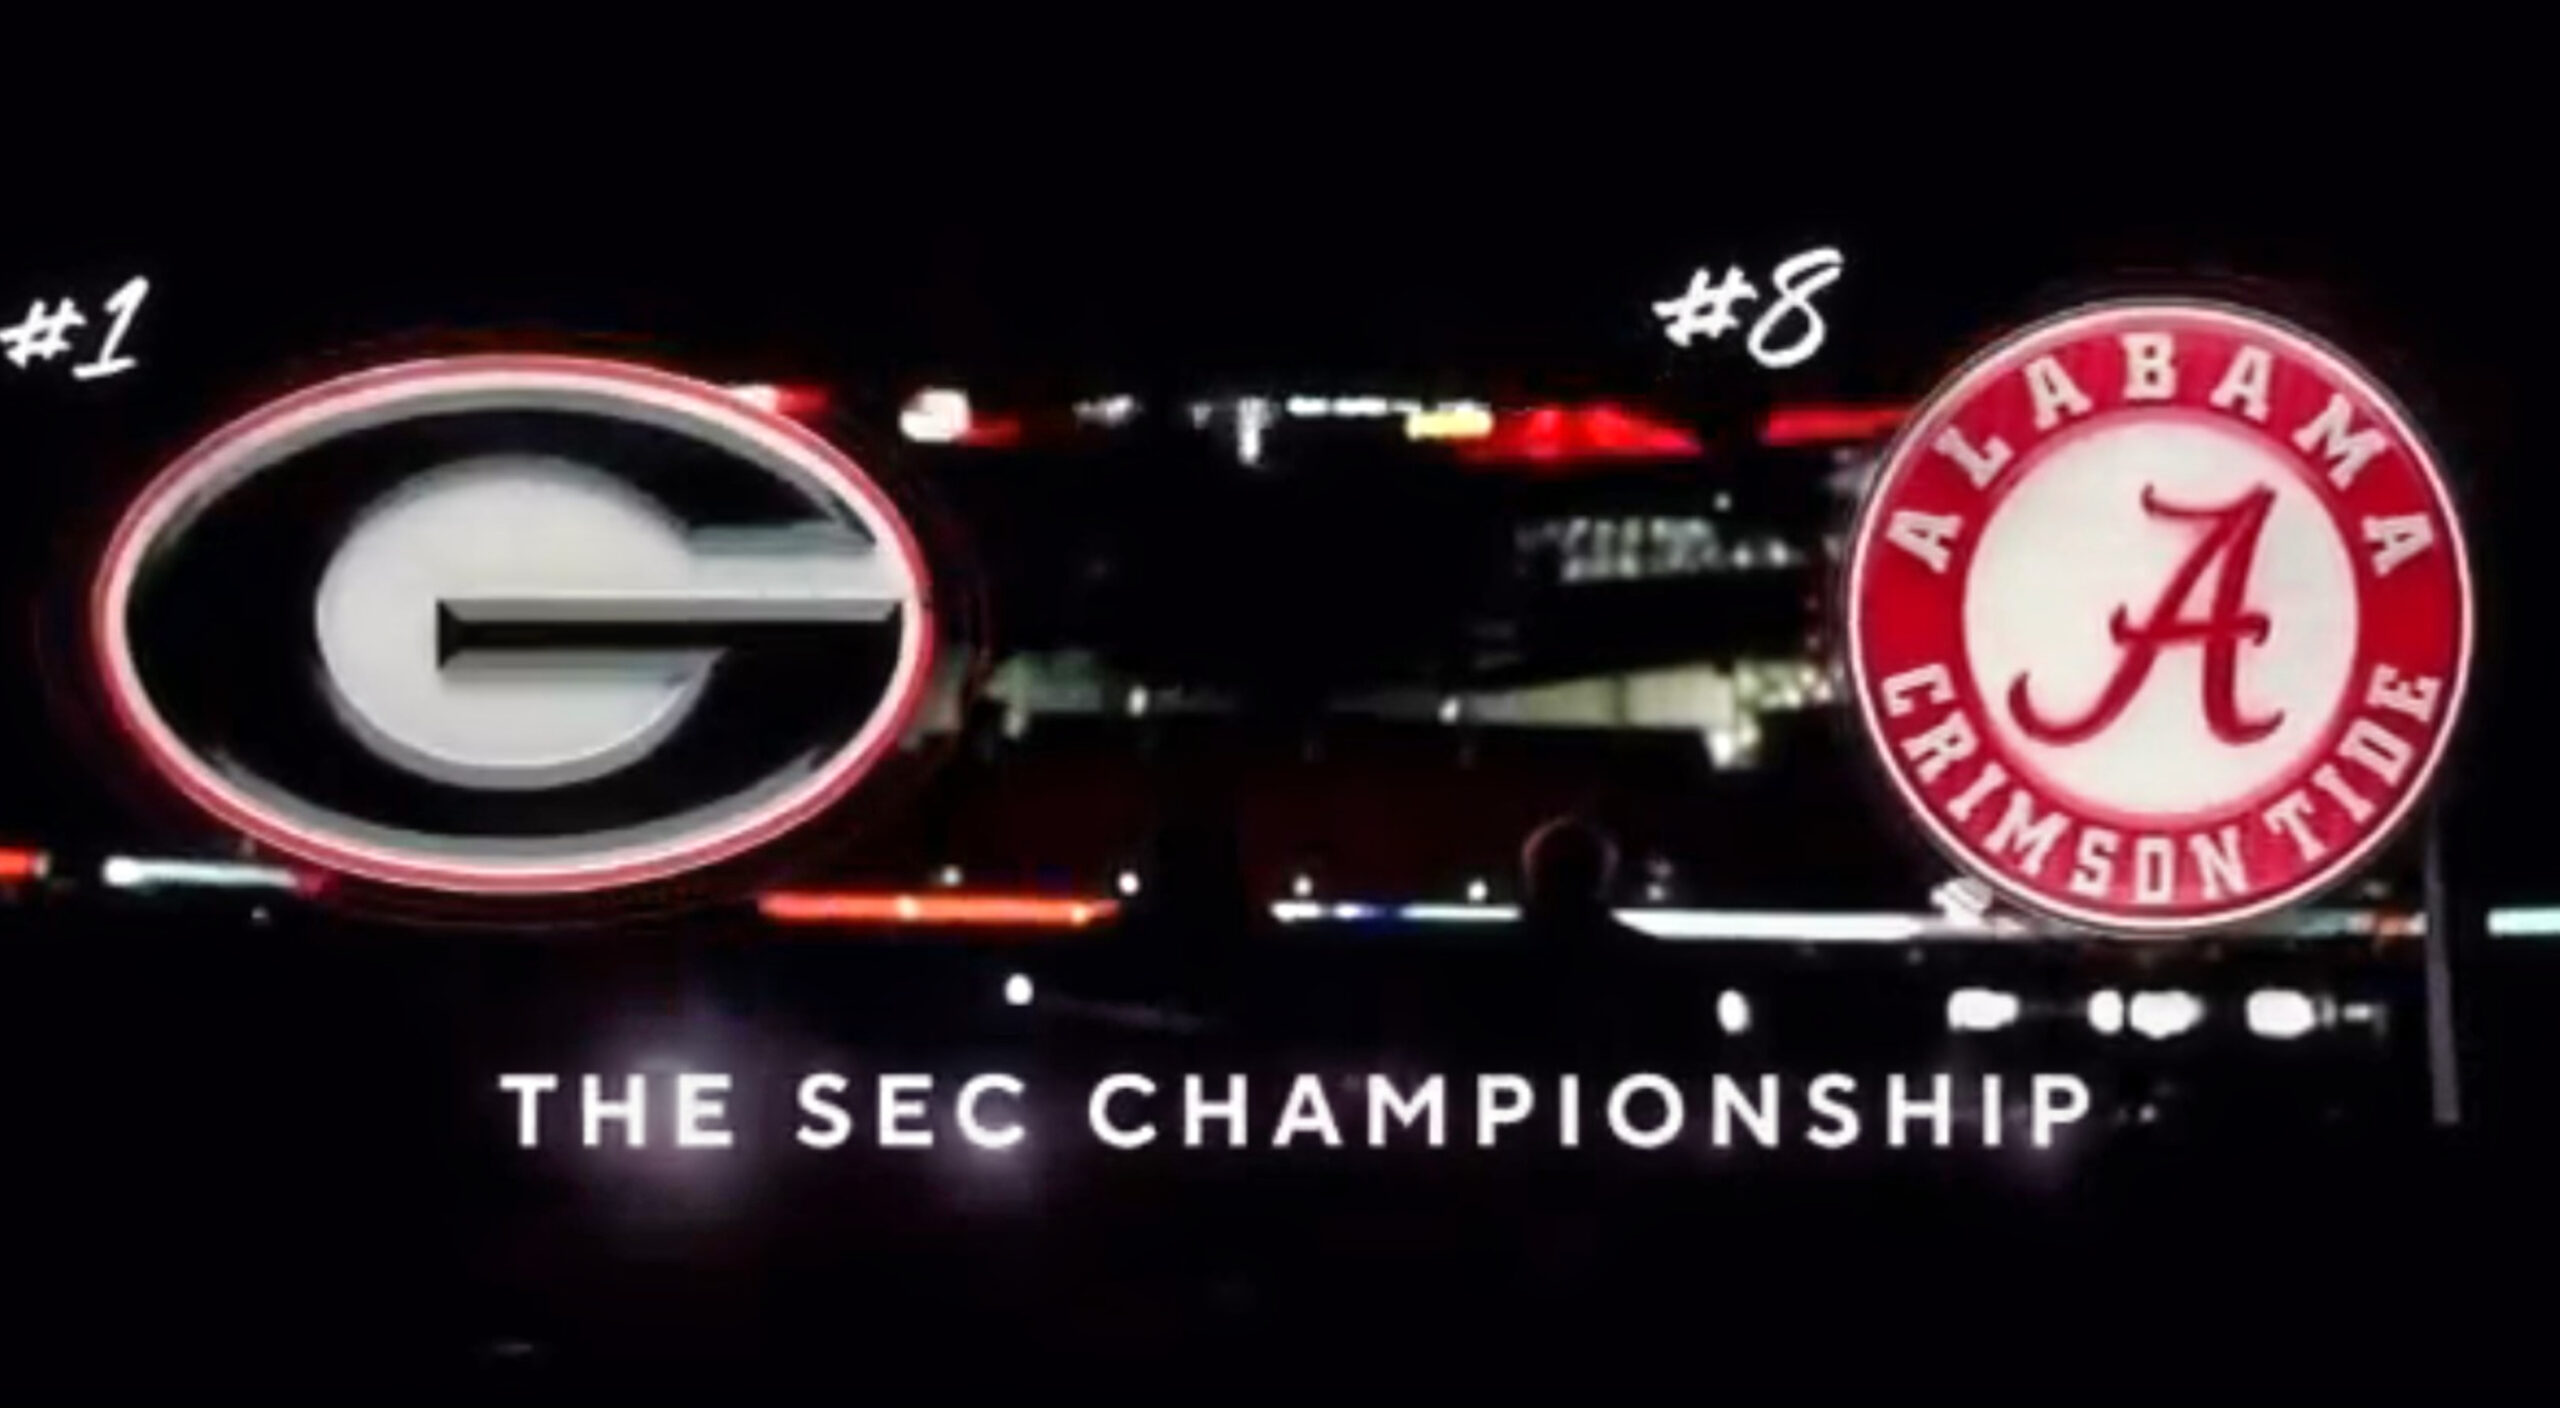 CBS Marked Final SEC Championship Game With Intense Video